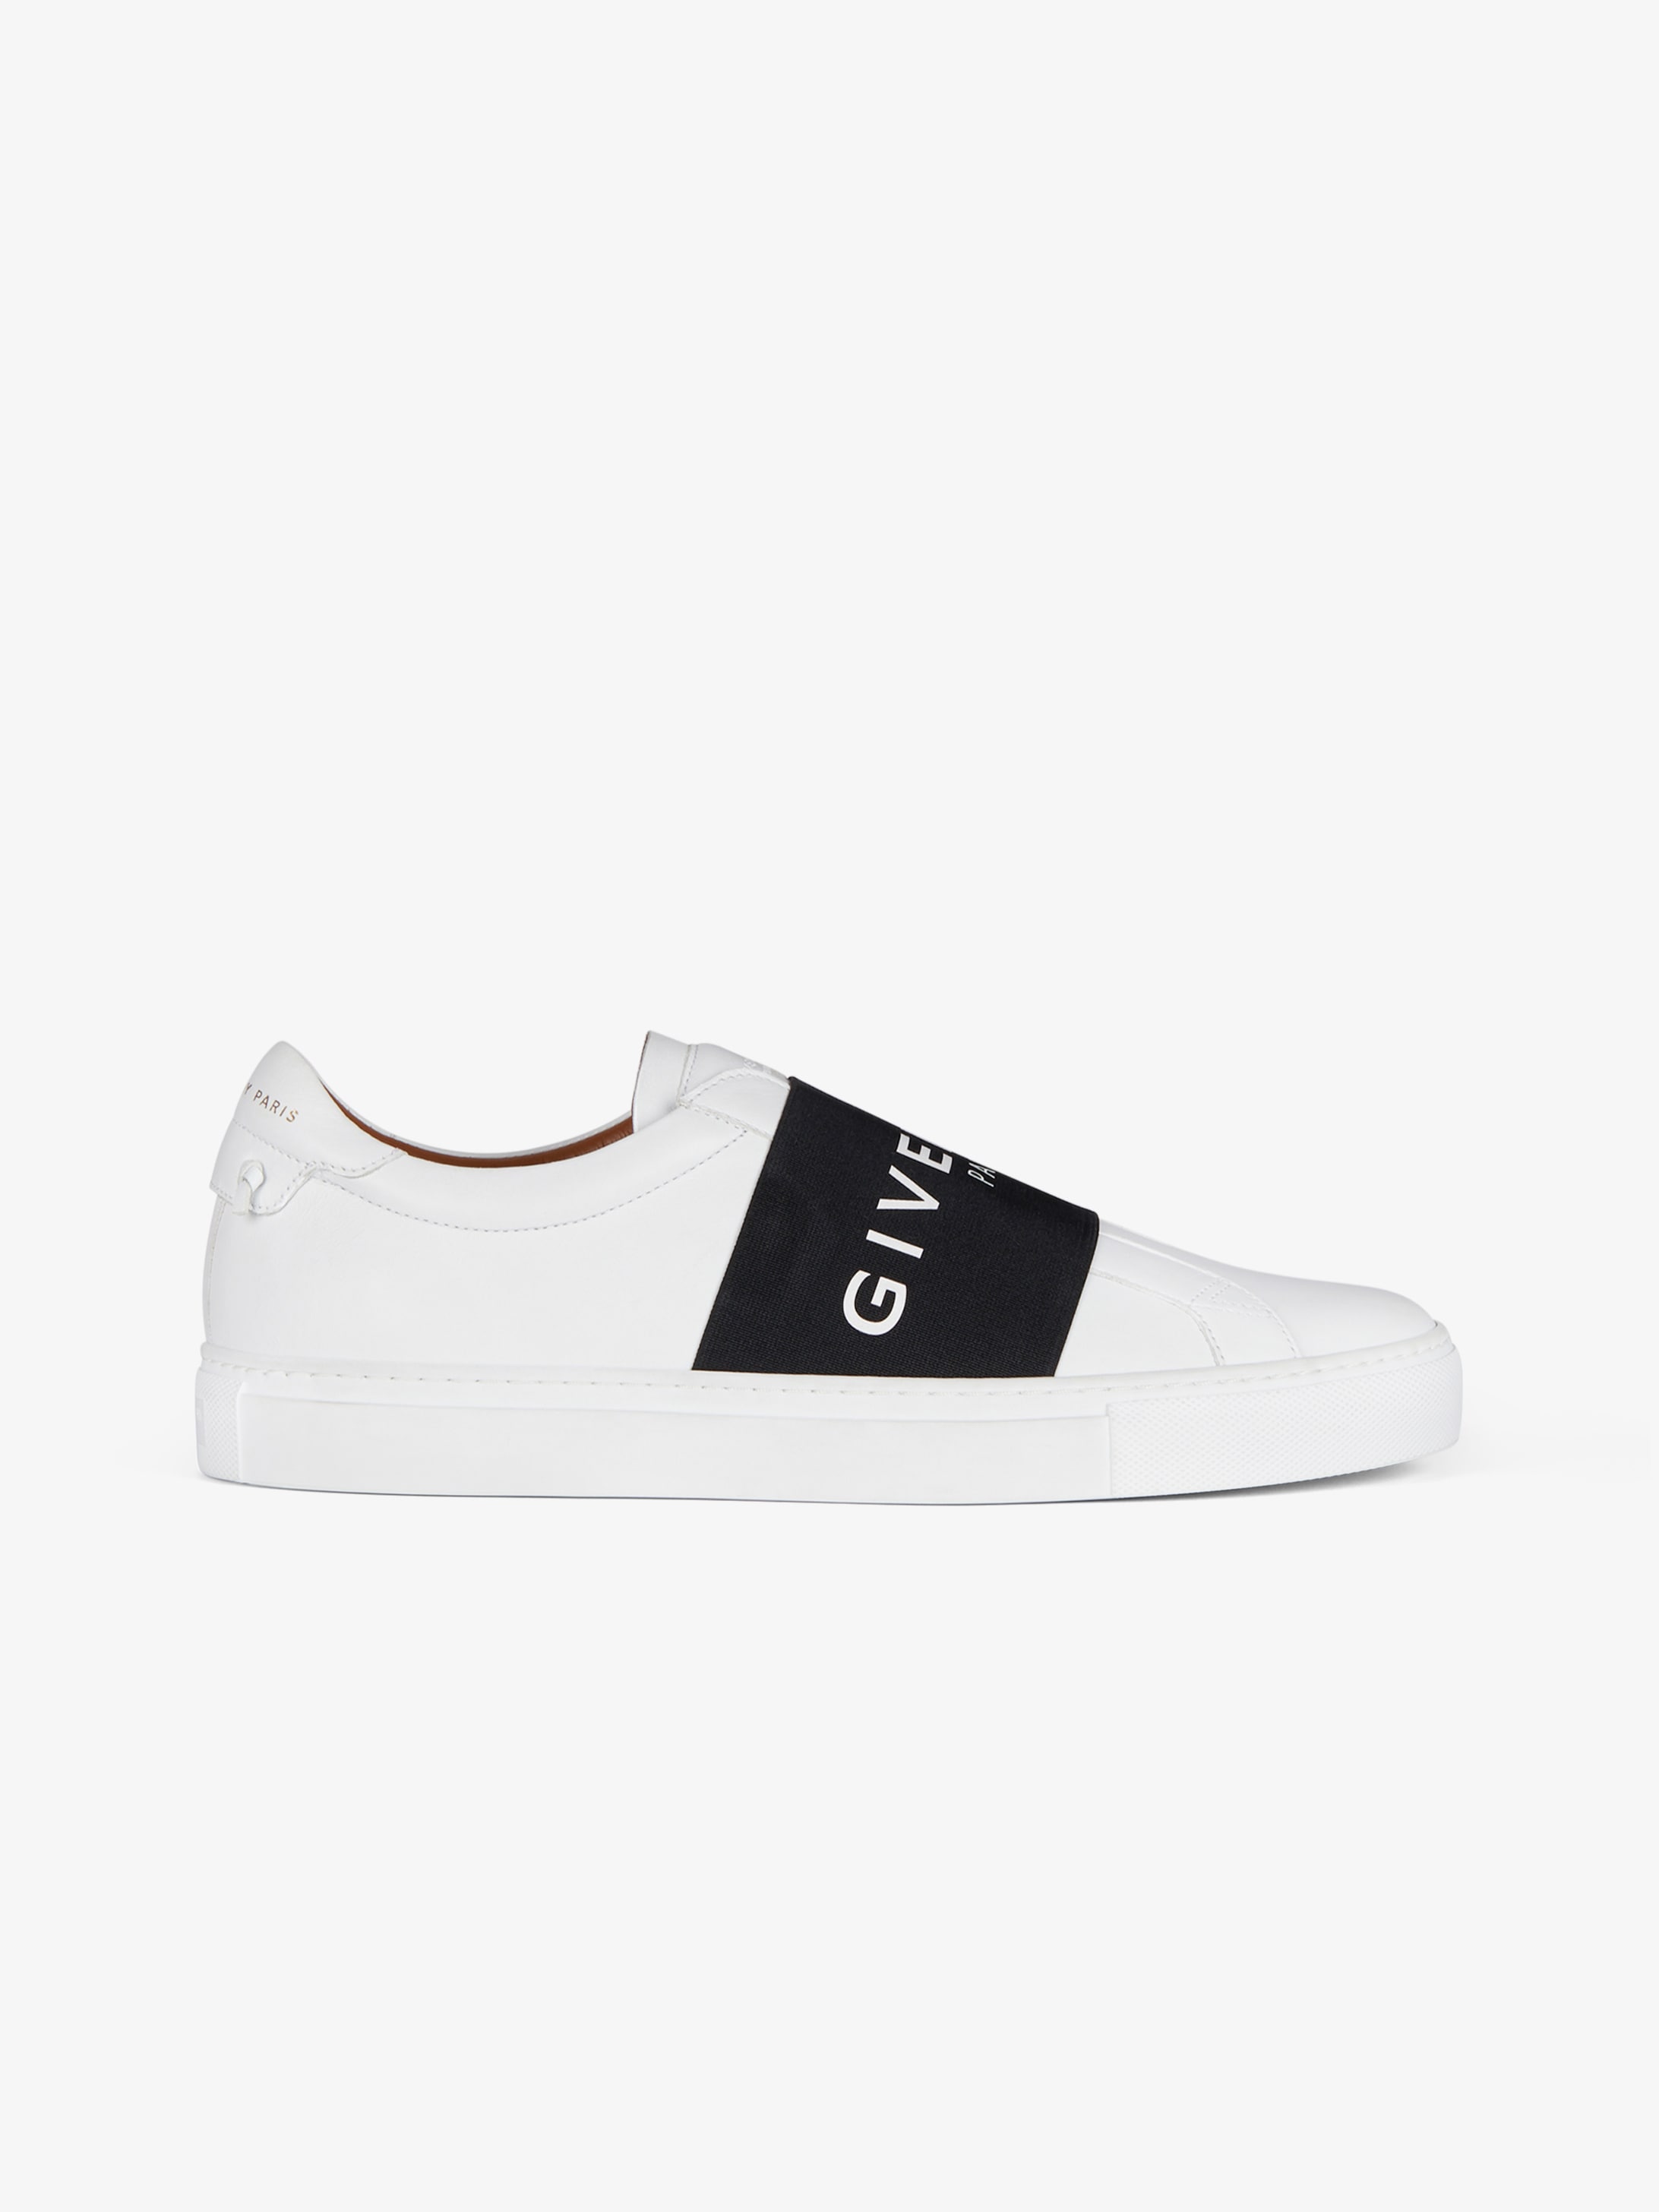 givenchy sneakers uk